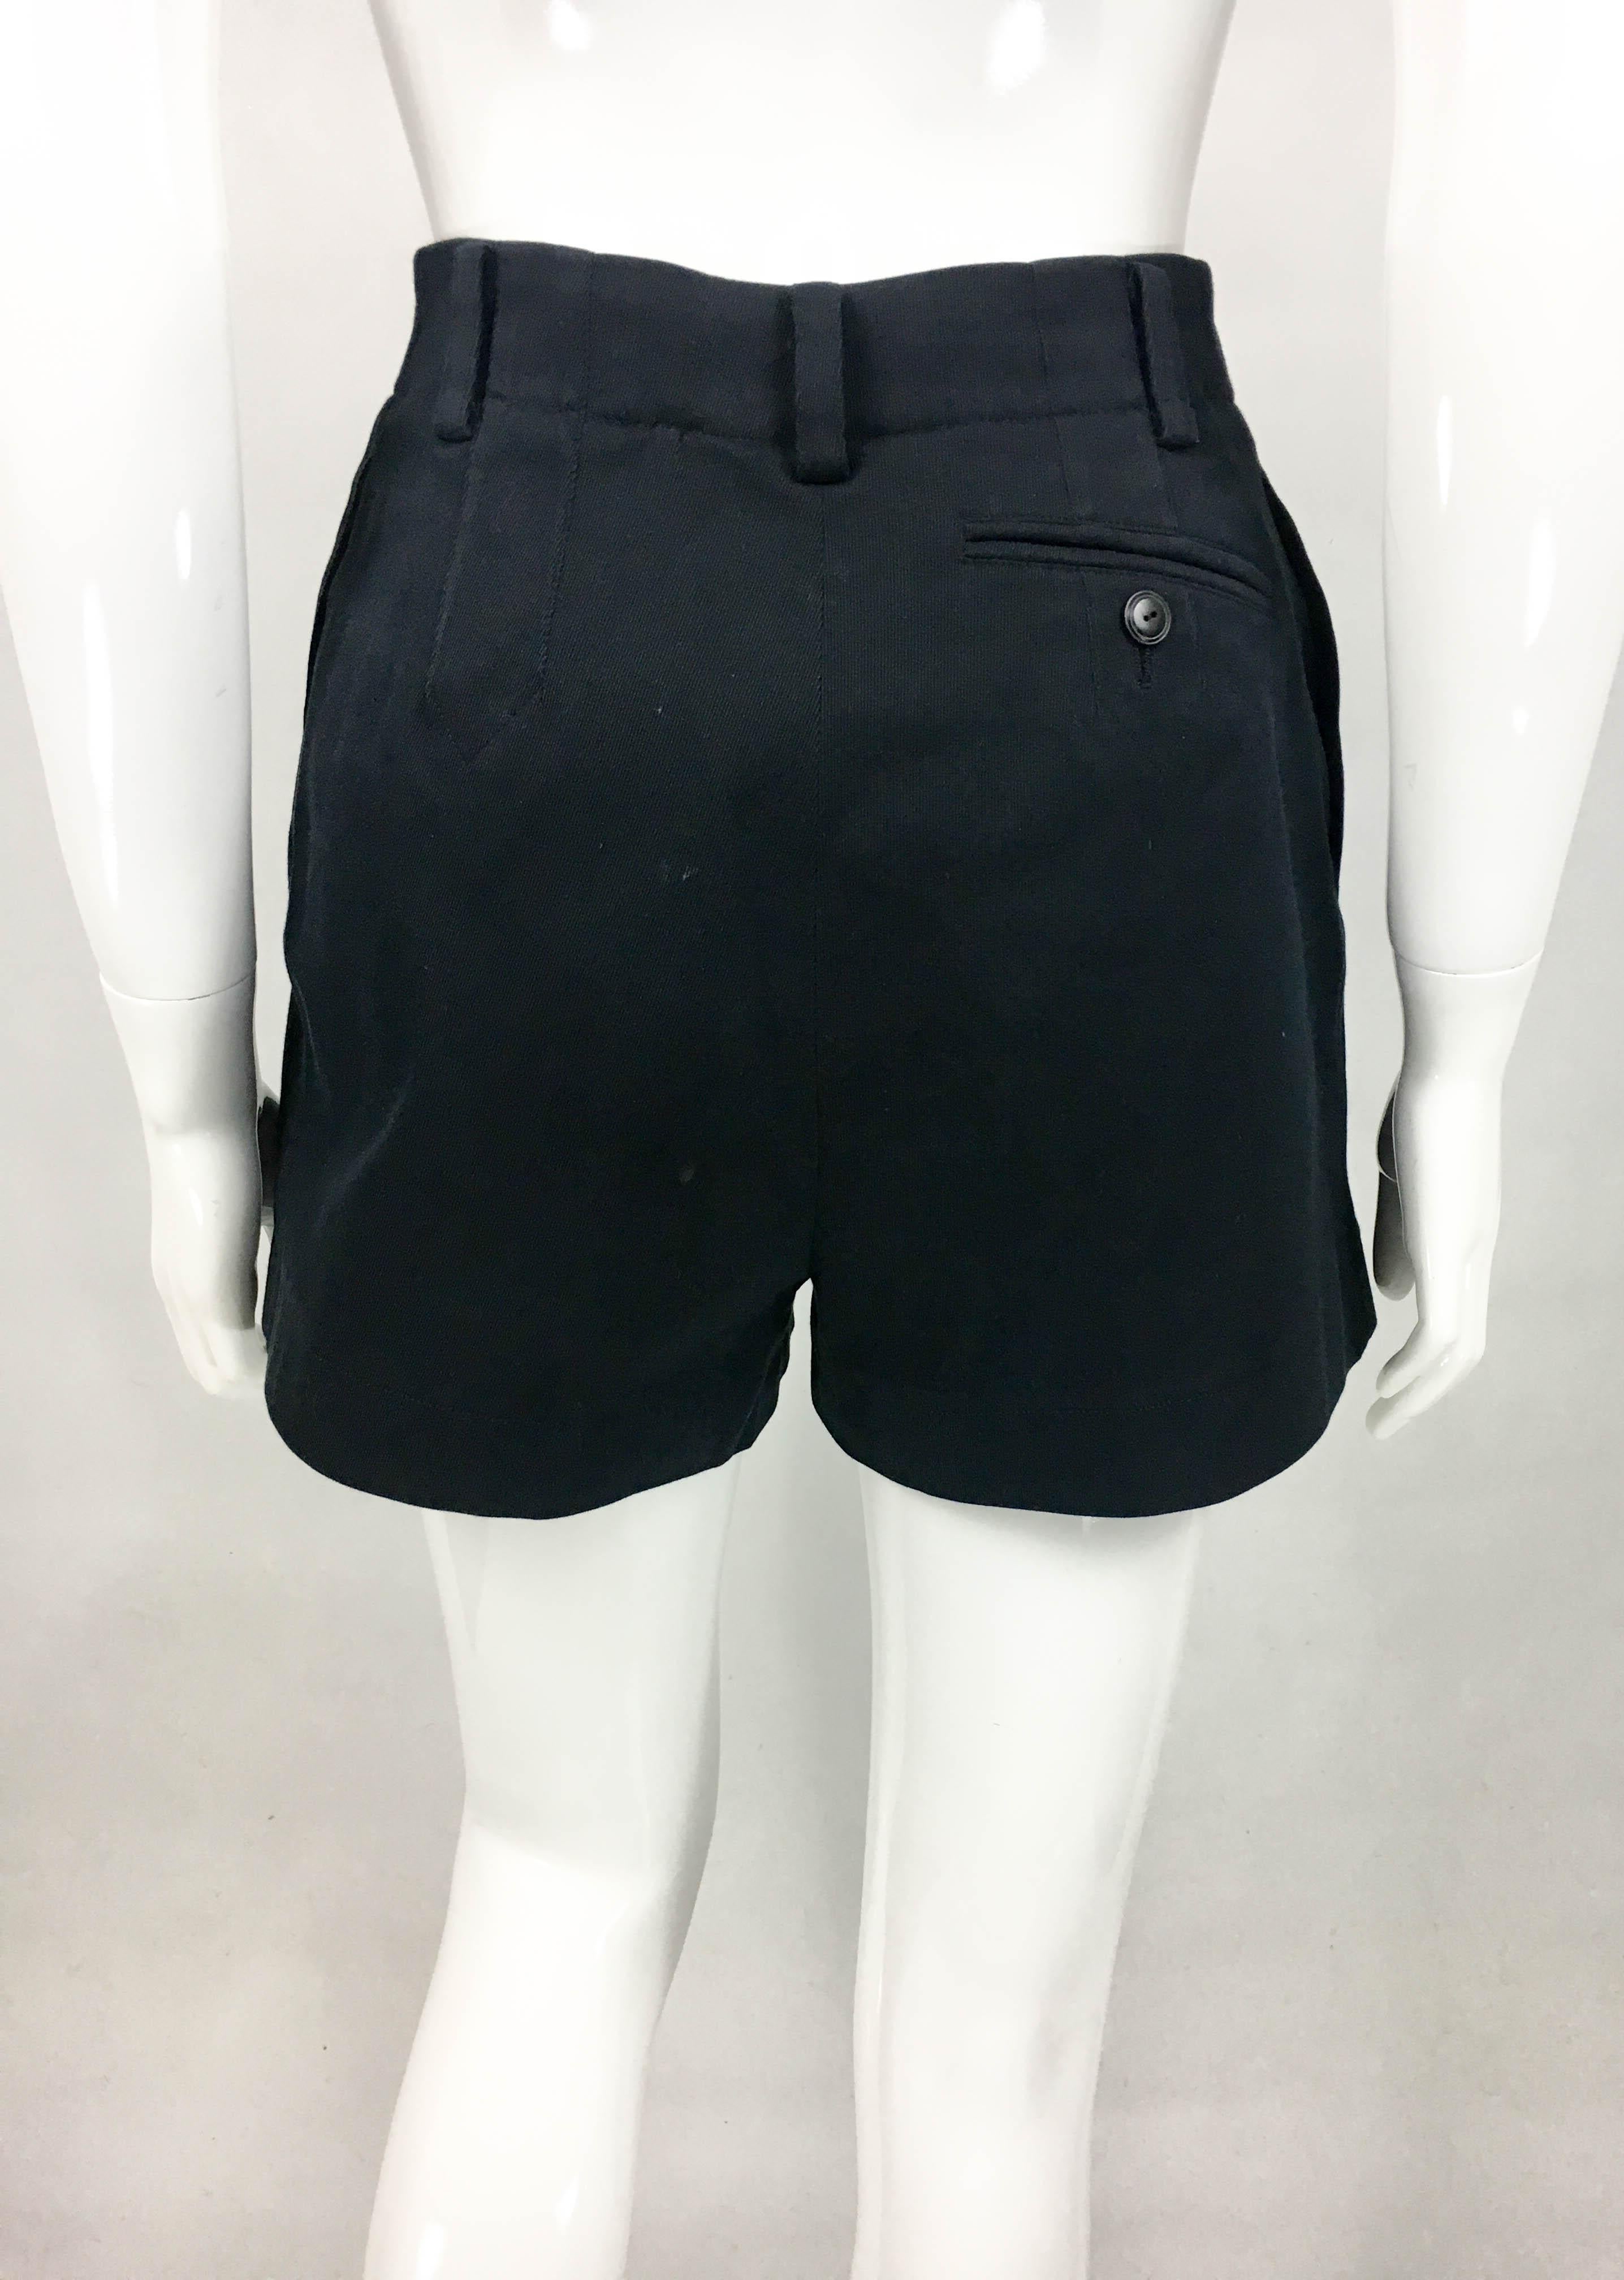 1990's Azzedine Alaia Black Tailored Shorts For Sale 7